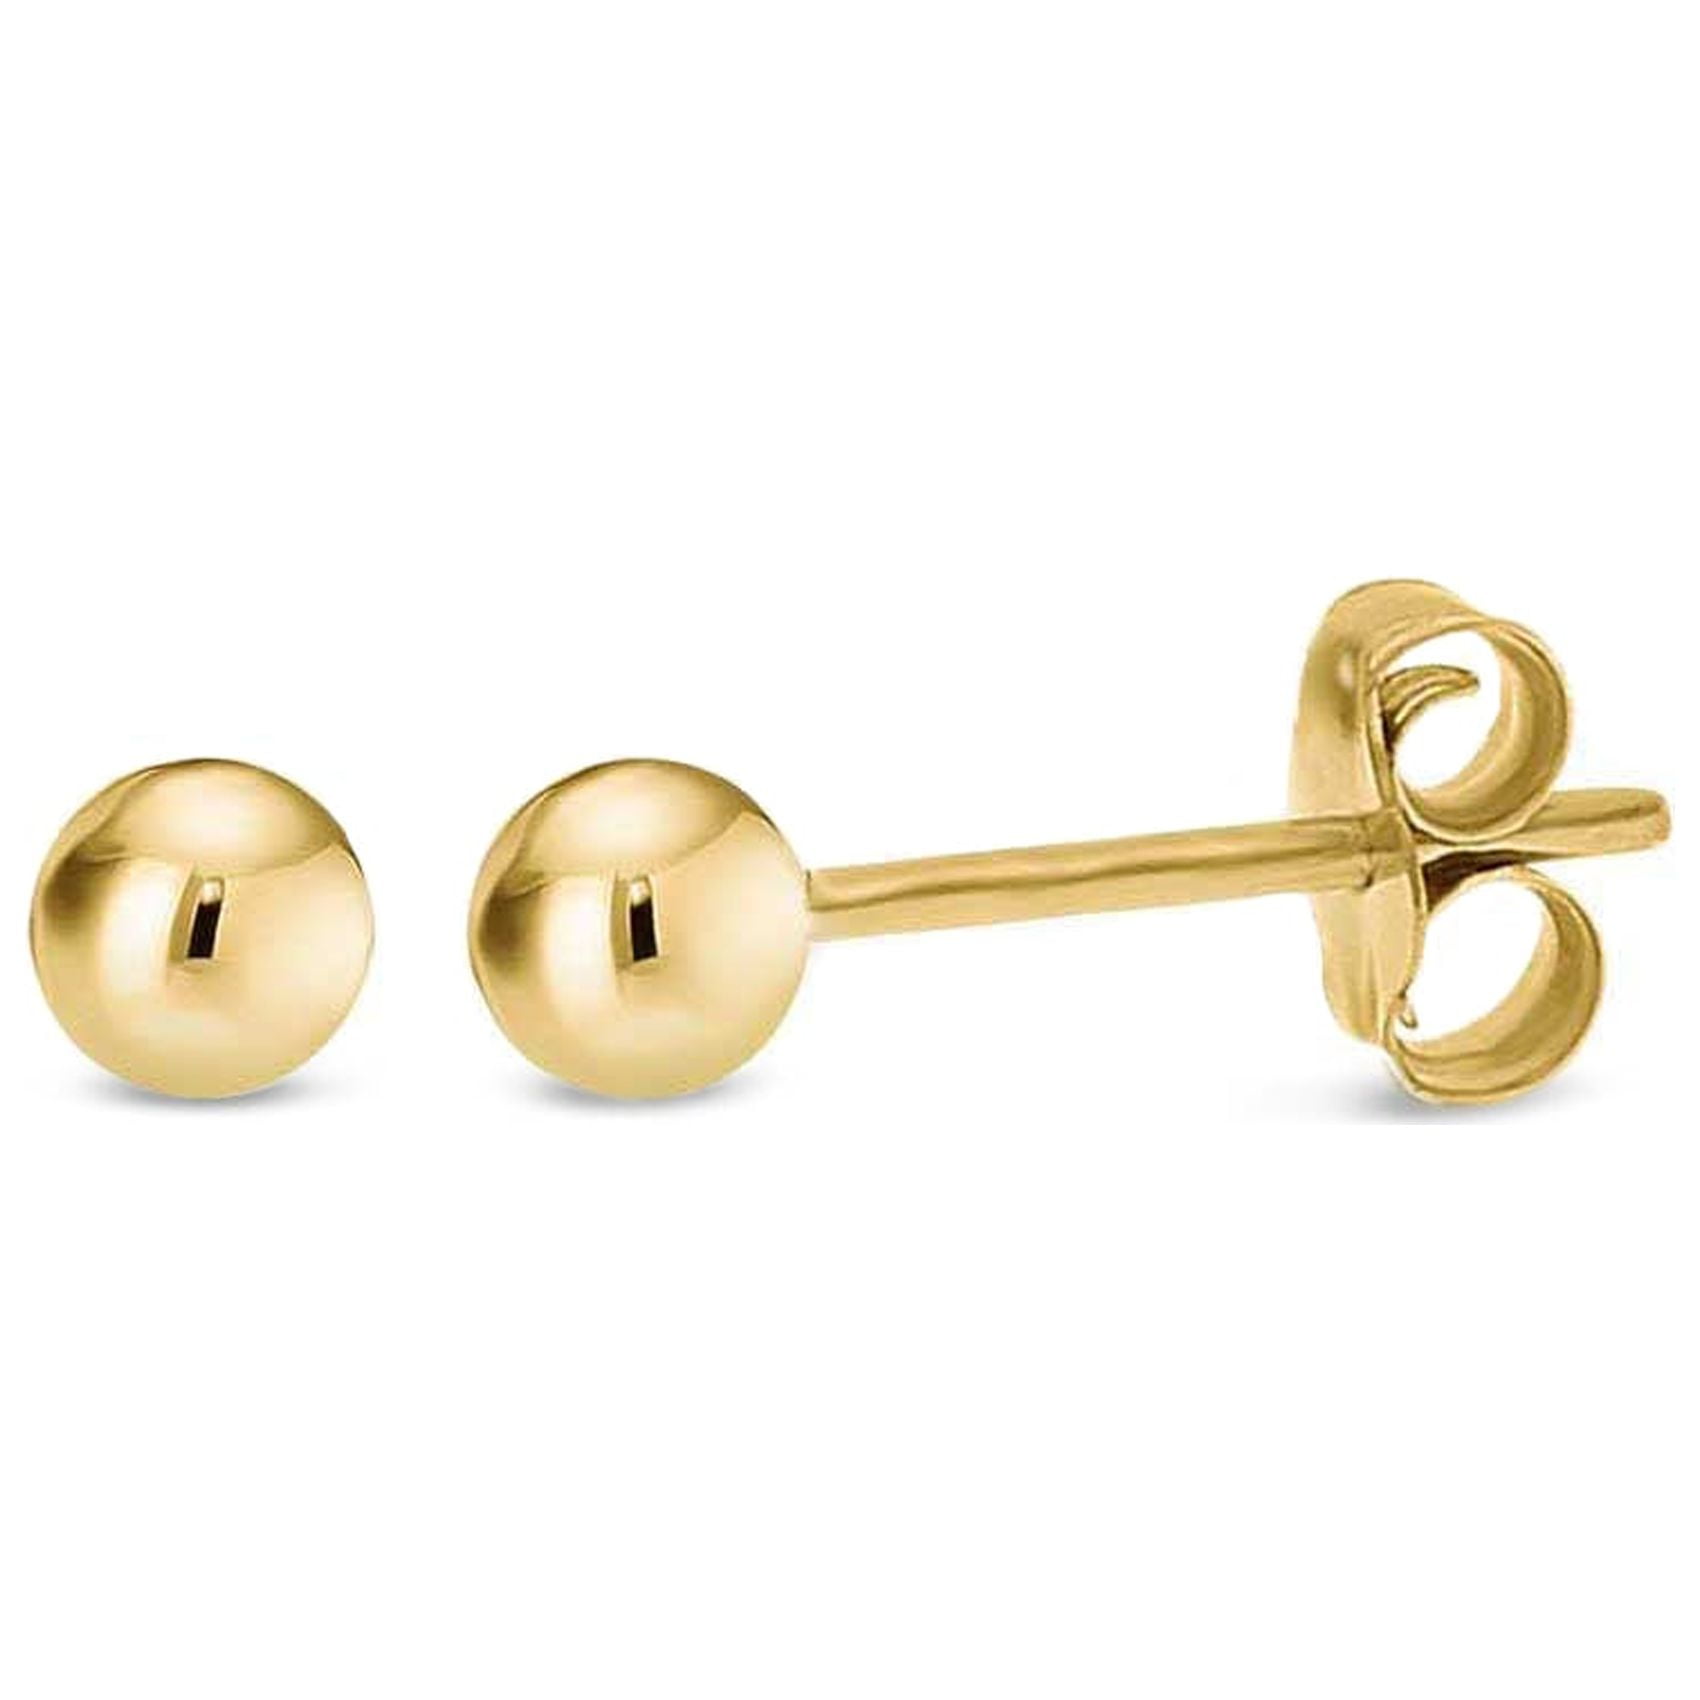 6mm Plain Round Ball Drops 14K Gold Filled Charms (F01GF)